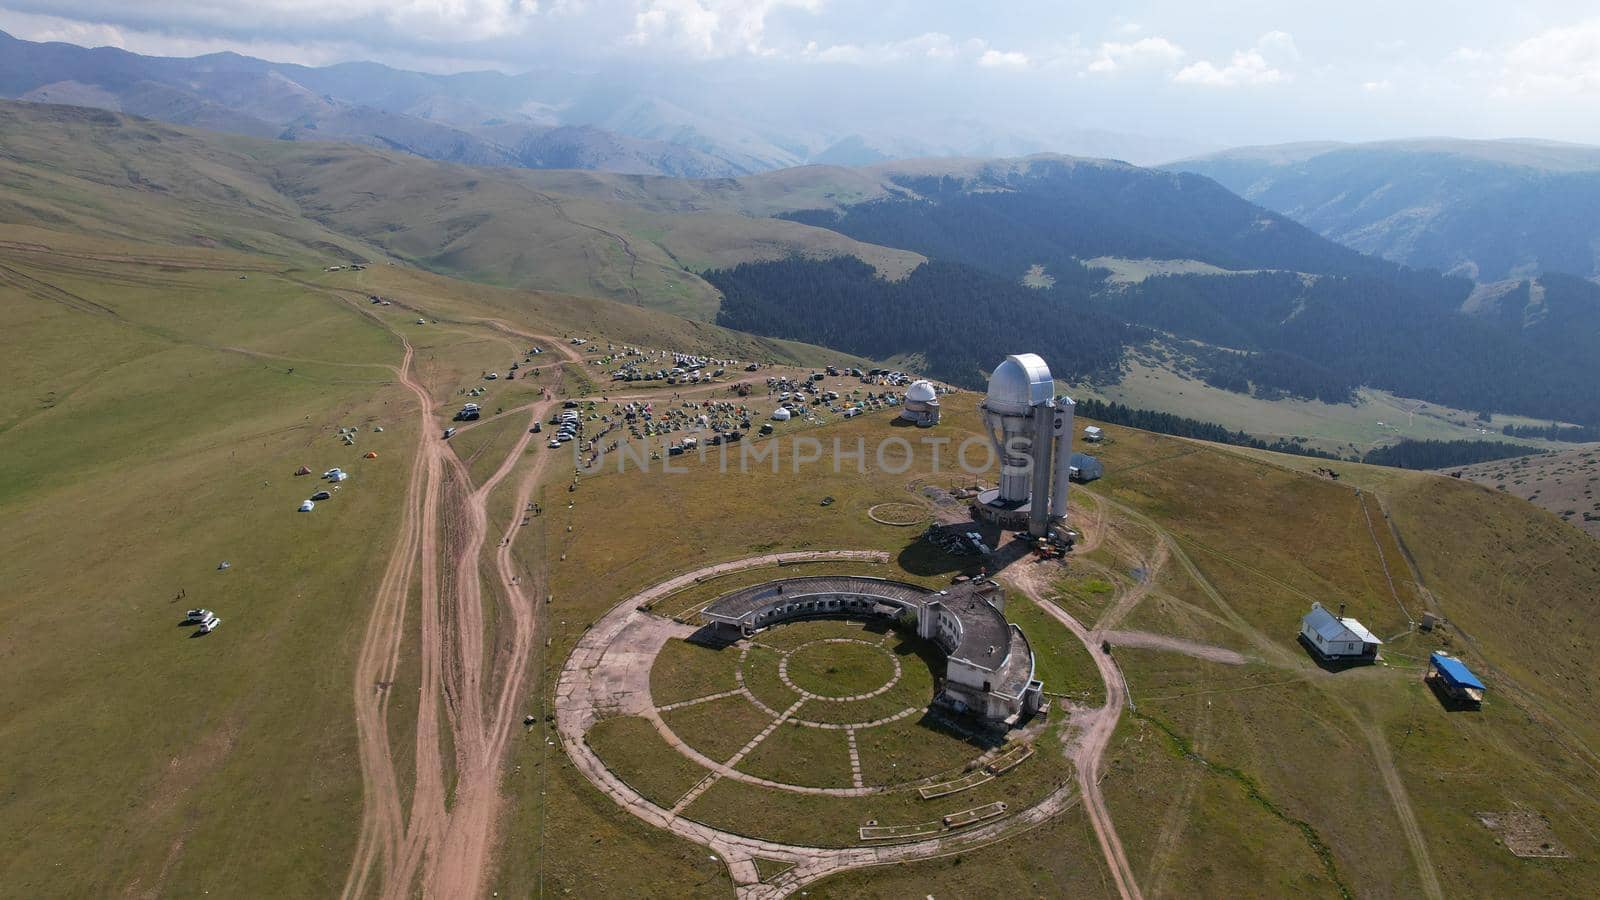 The Assy-Turgen Observatory is high in mountains by Passcal